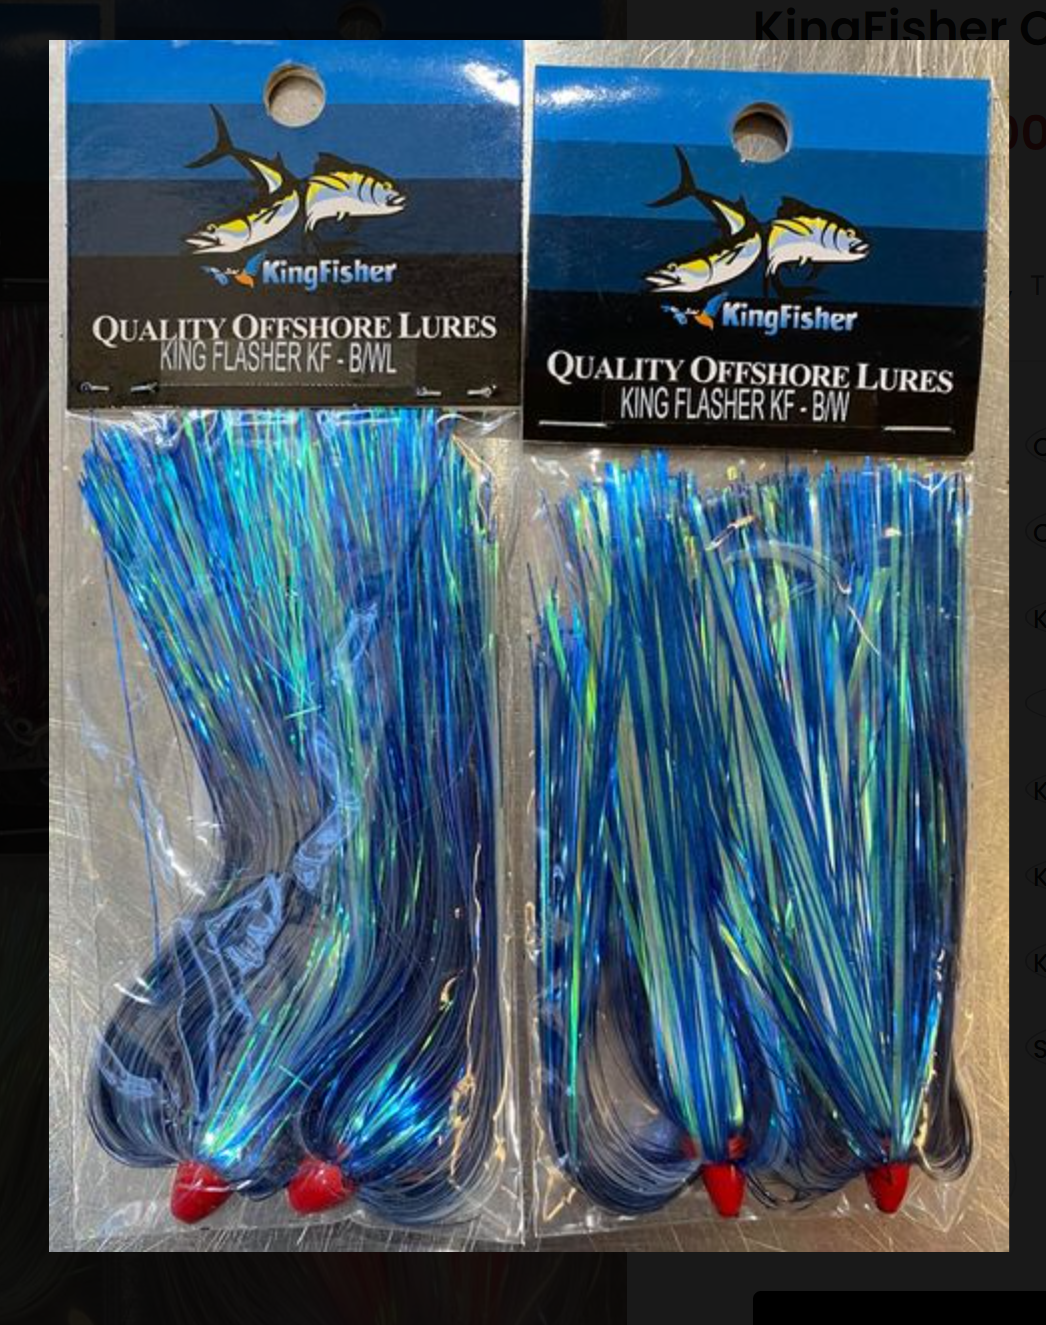 KingFisher Offshore Lures - The Bait Shop Gold Coast